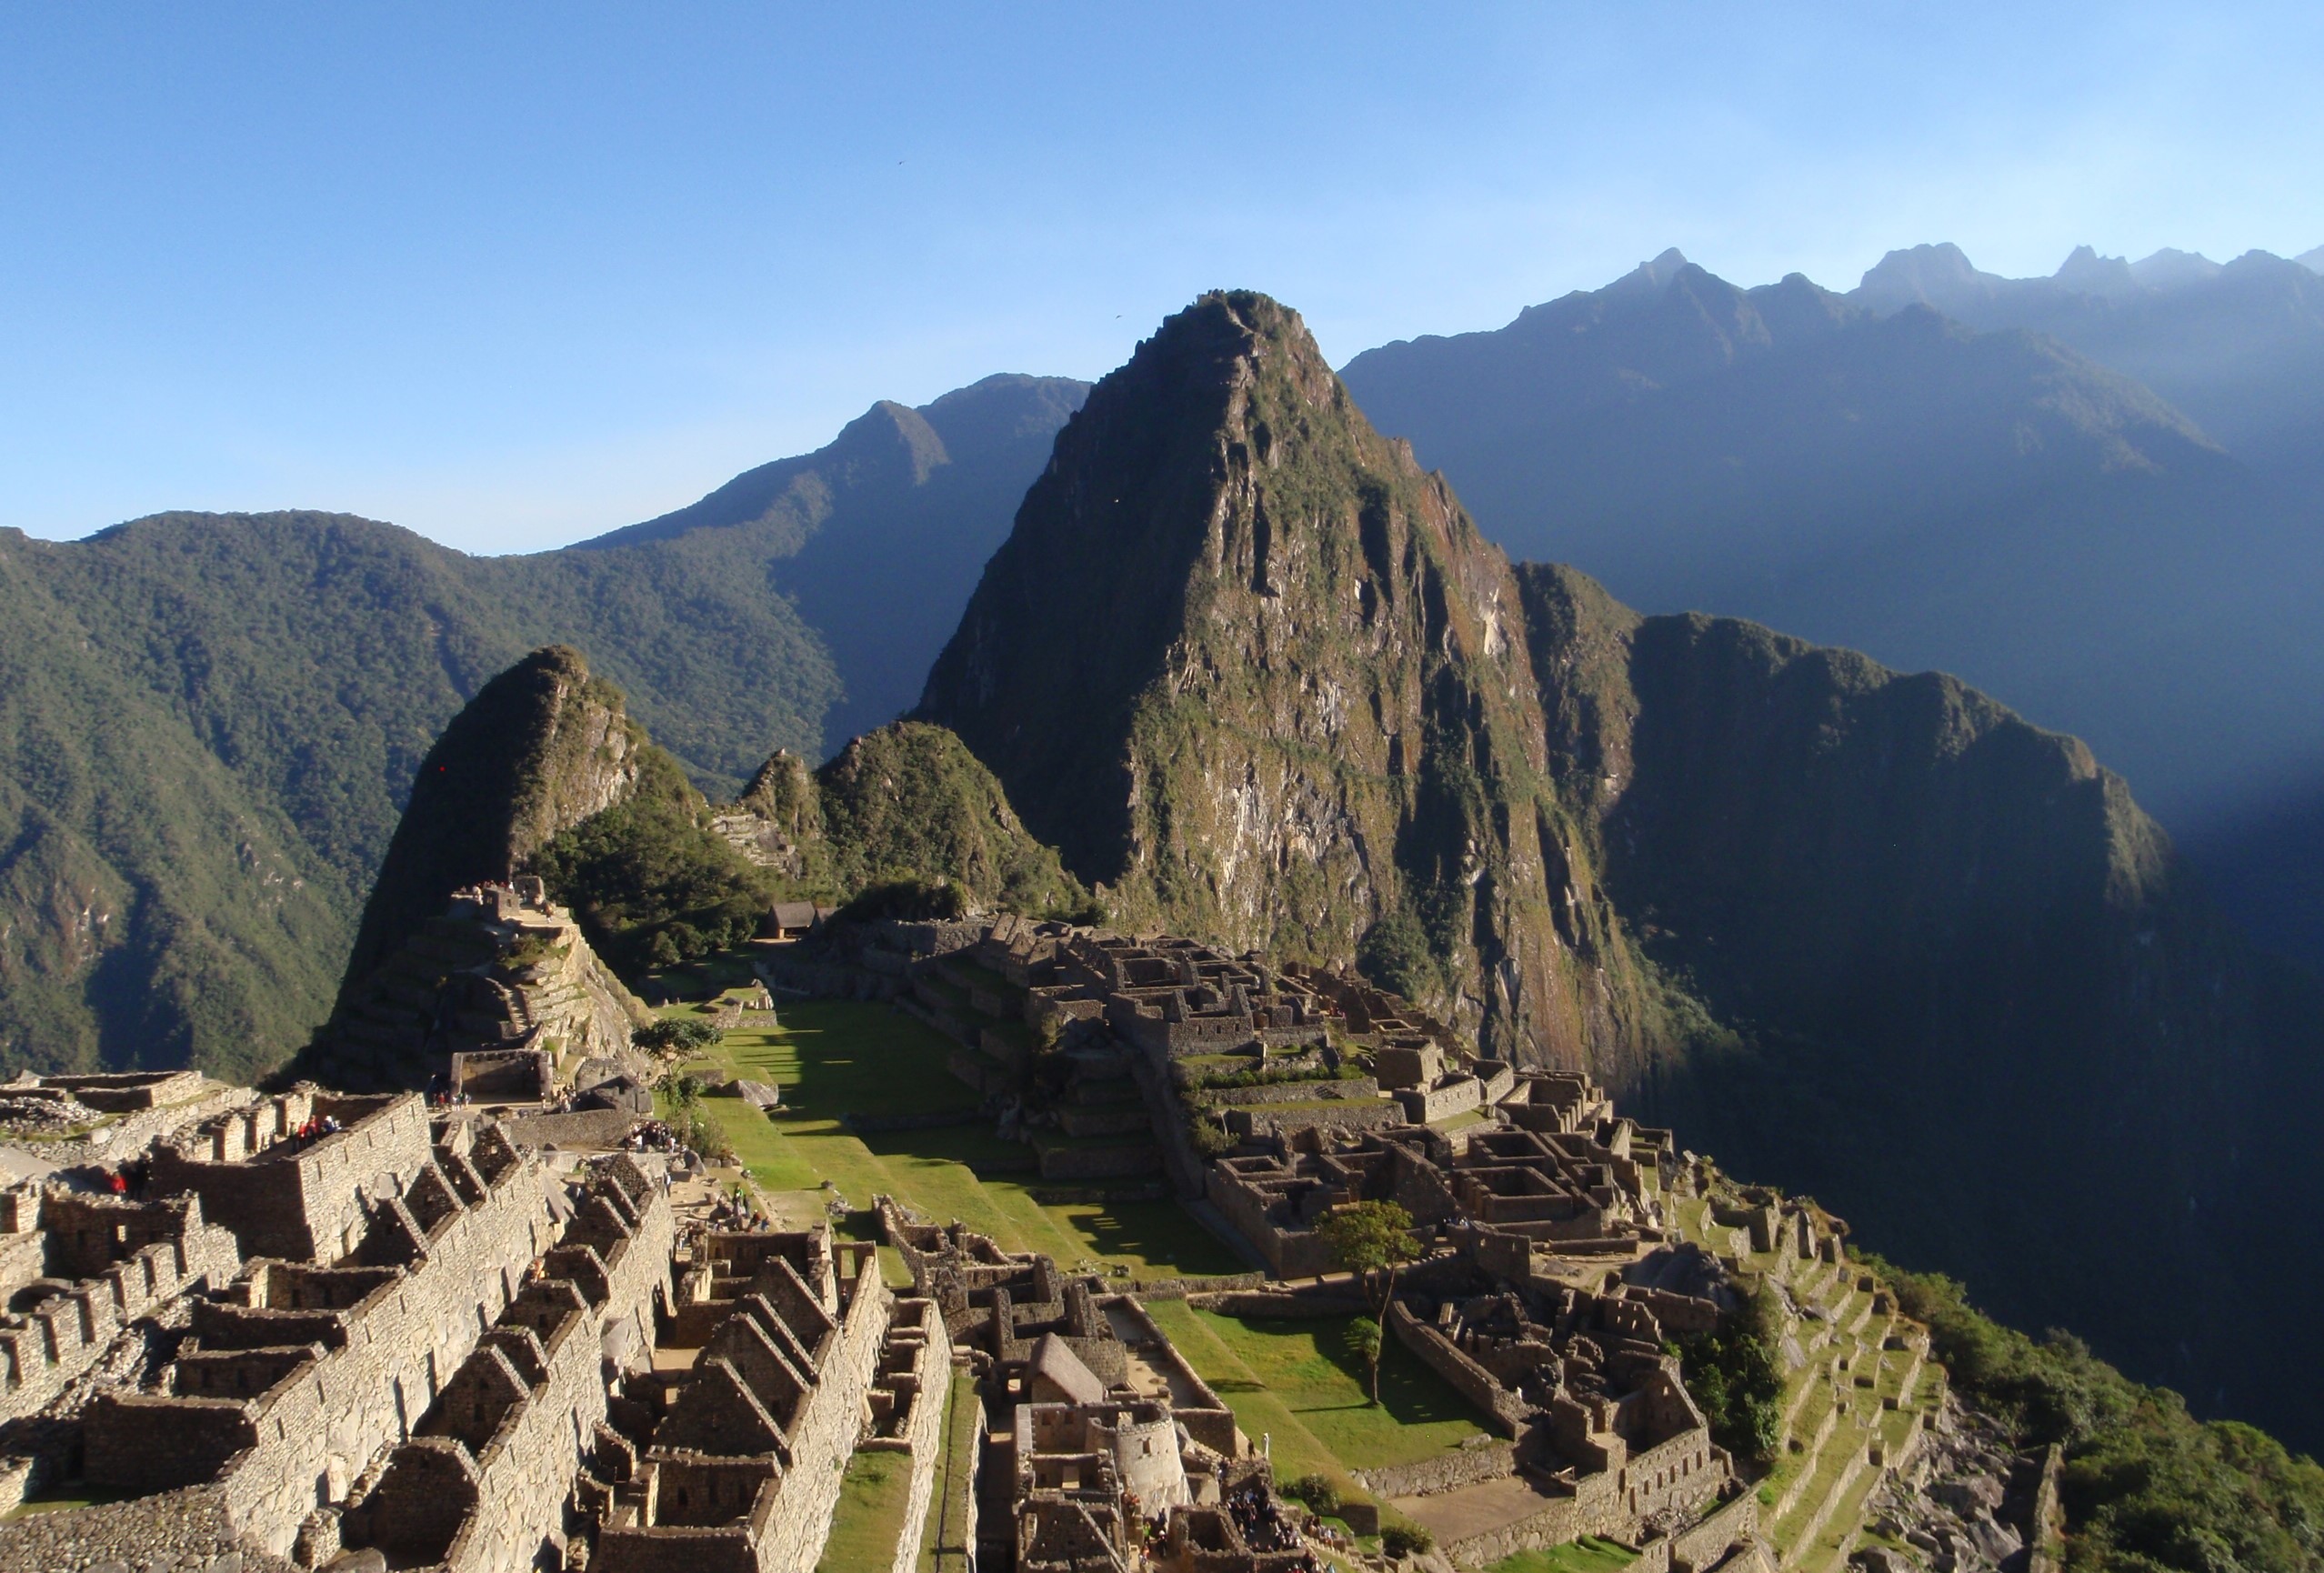 Sunrise view of Machu Picchu, Peru taken from the decent of the Inca Trail, image search